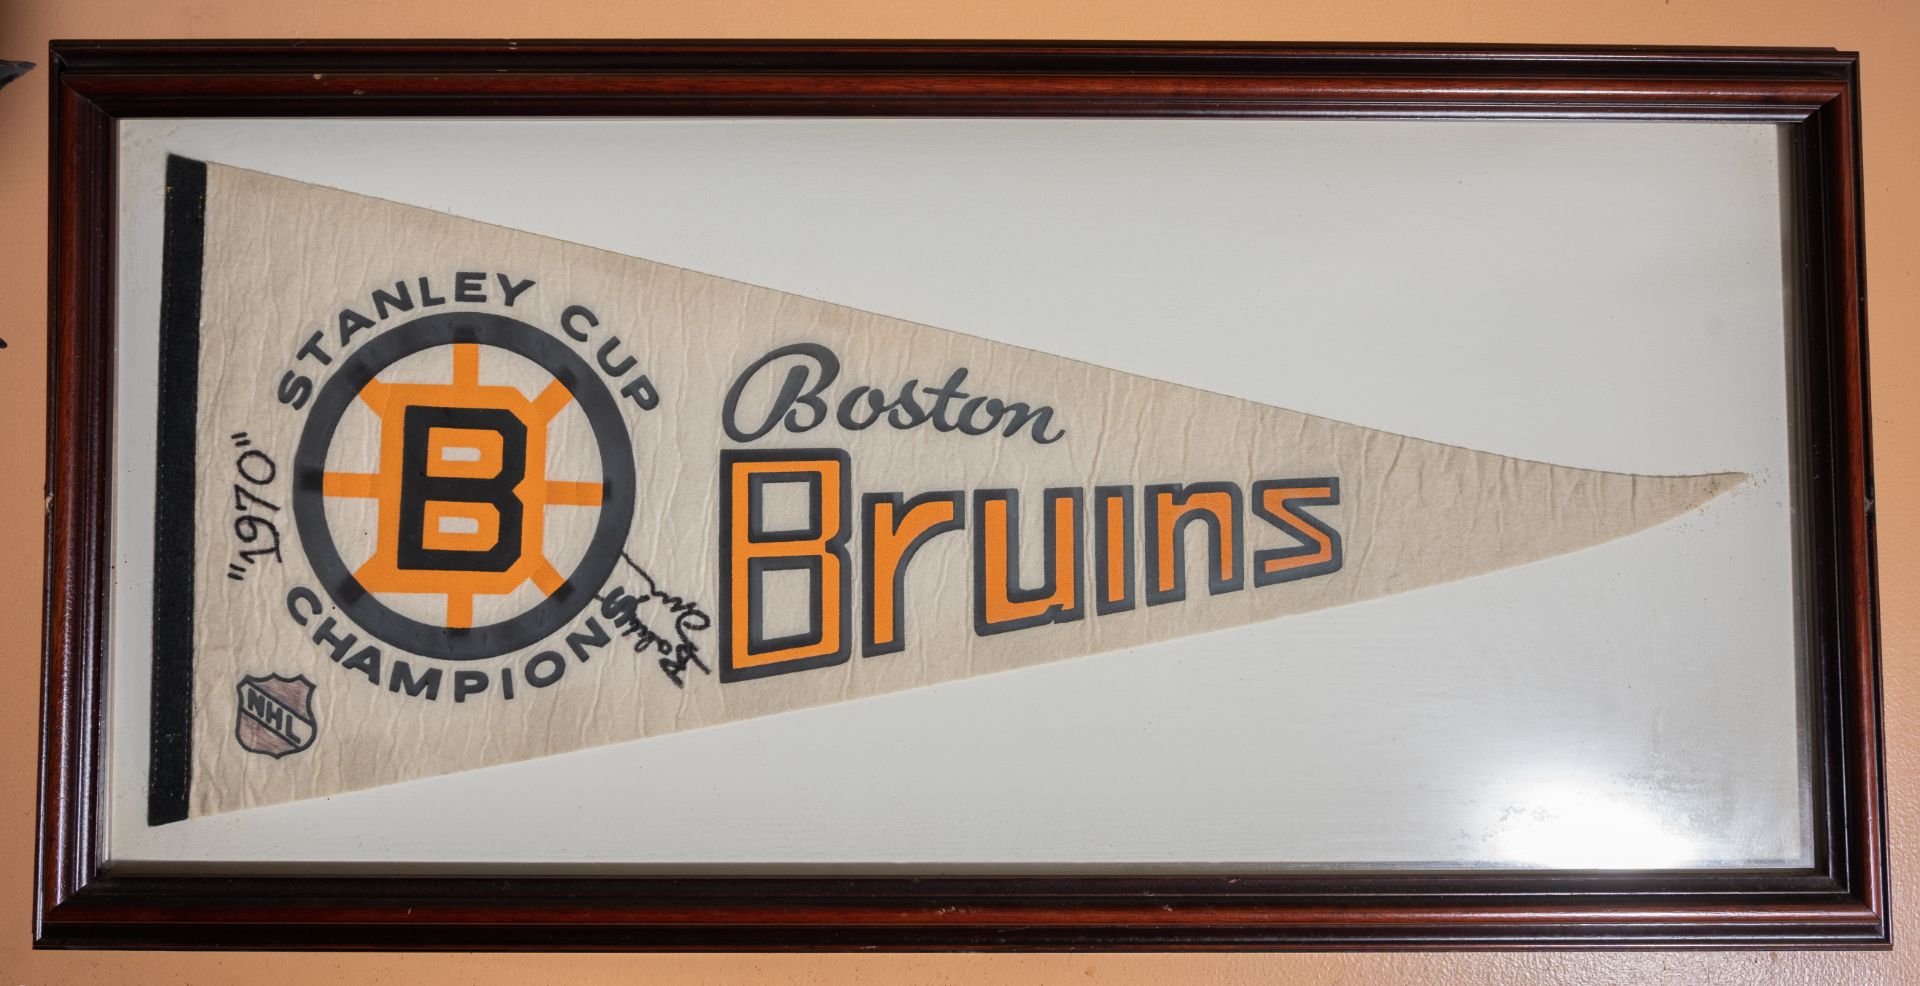 Boston Burins Stanley Cup 1970 Champion Pennant Signed "Bobby Orr", Framed 34"x17"